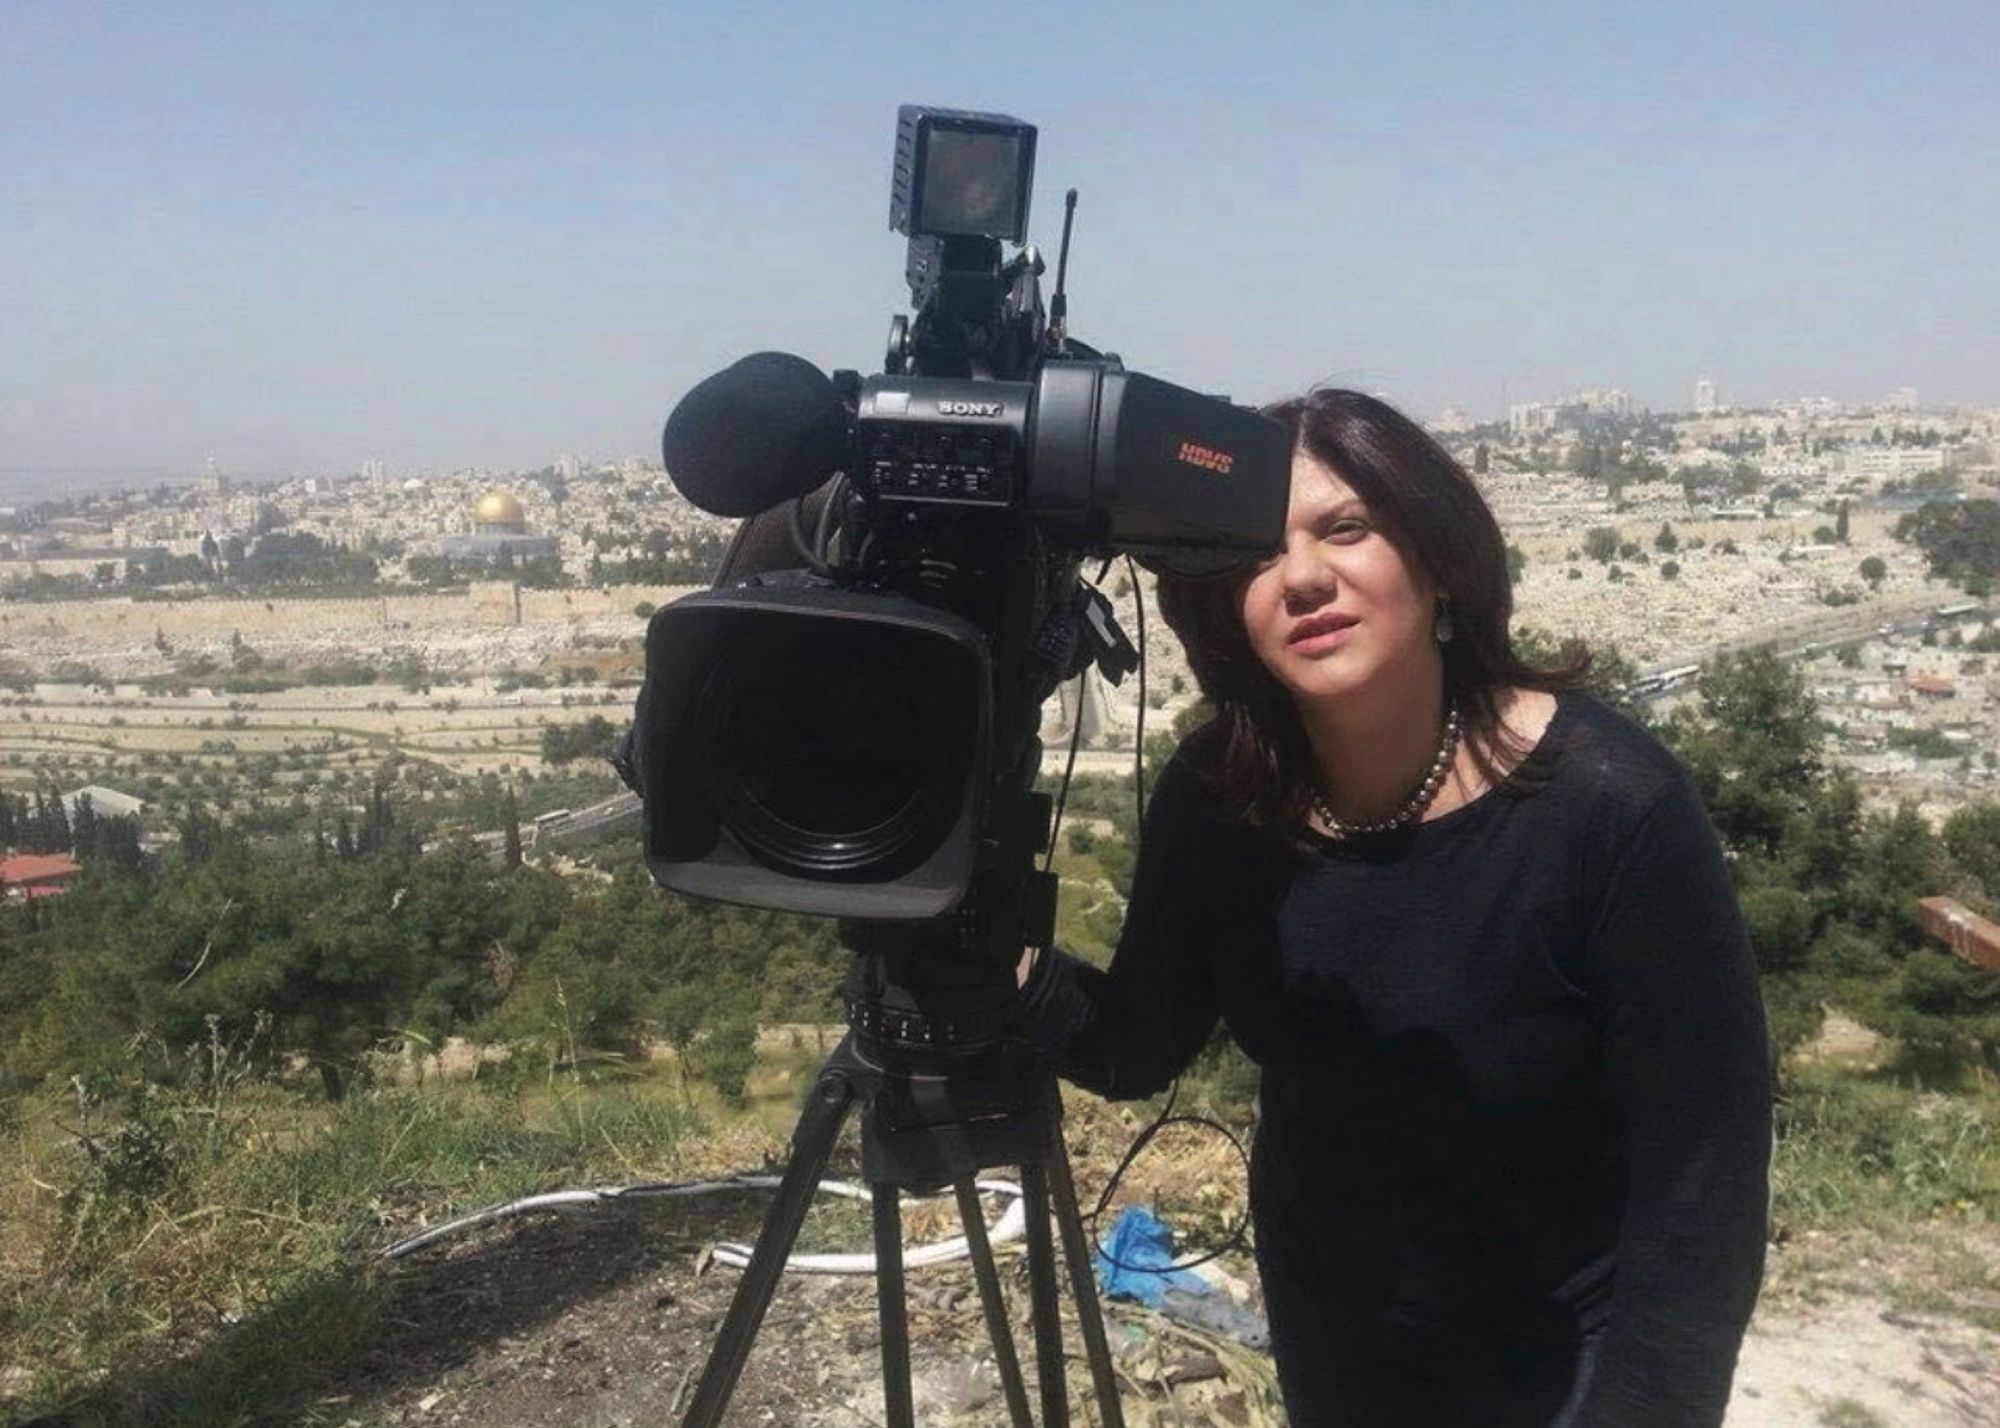 Top Ministerial Advisors Asked Staff To Delay Statement Mourning Palestinian Journalist Because of Queen’s Funeral